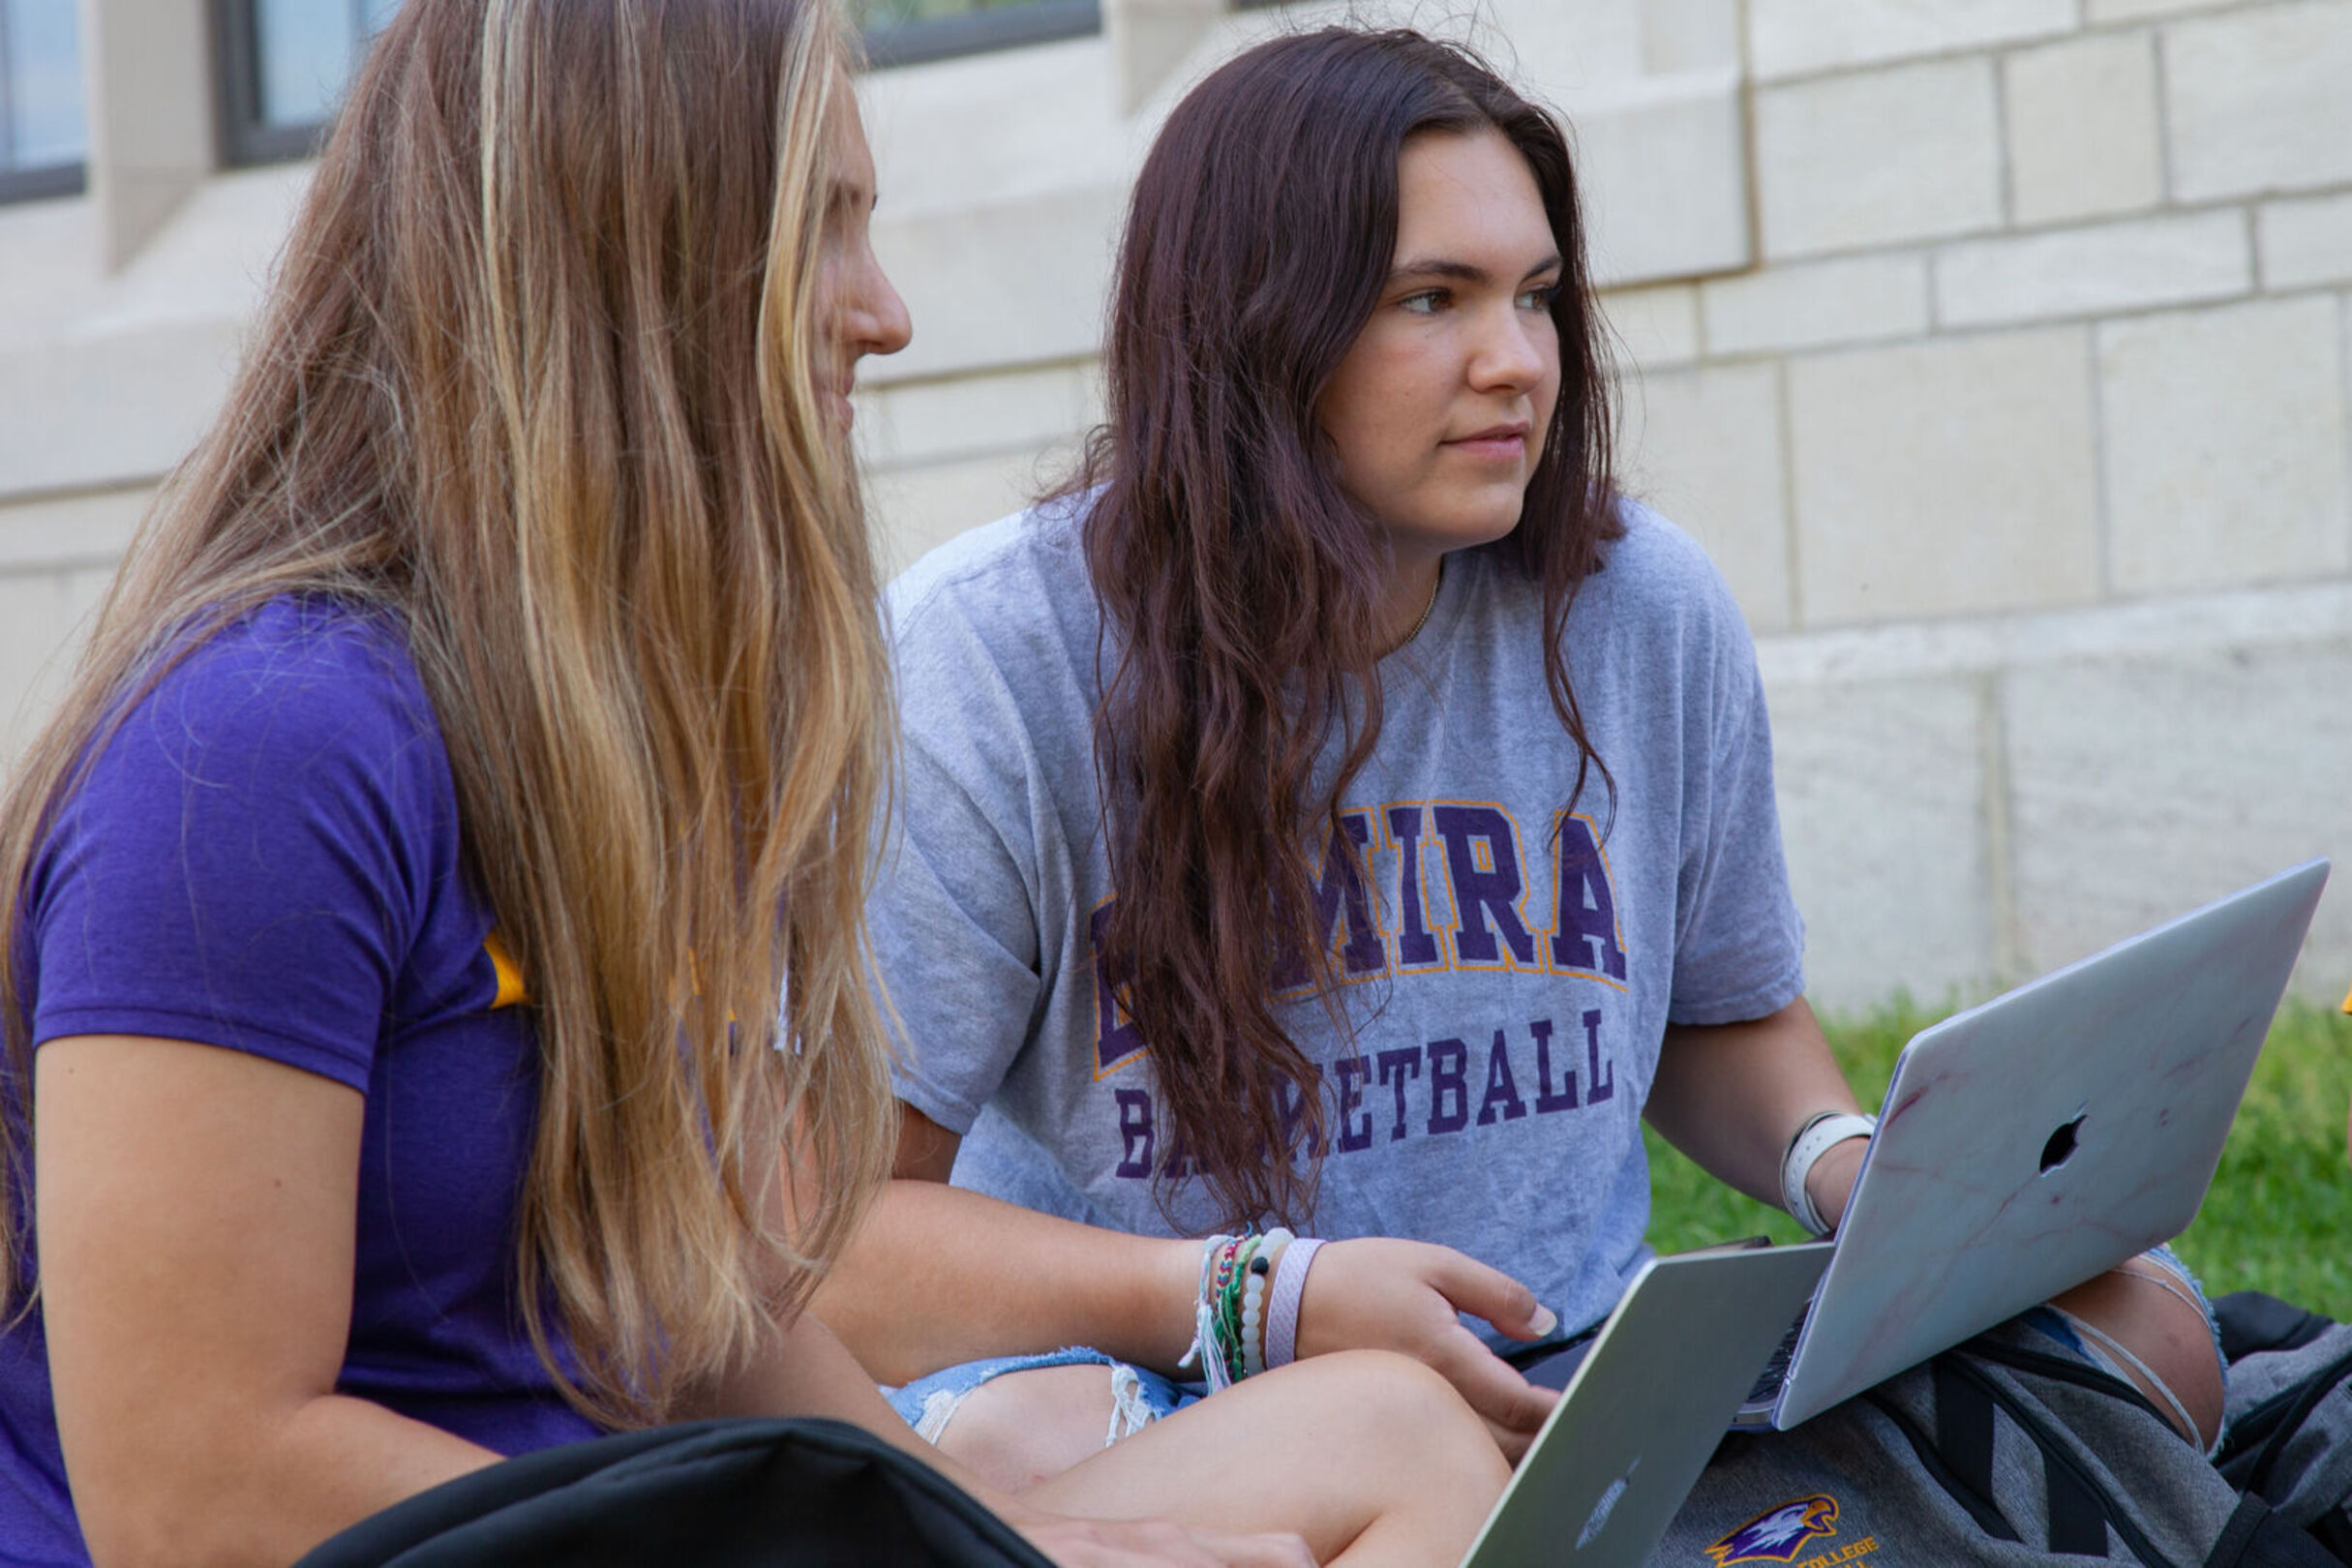 Two female students sit together on the grass while holding laptops on their laps